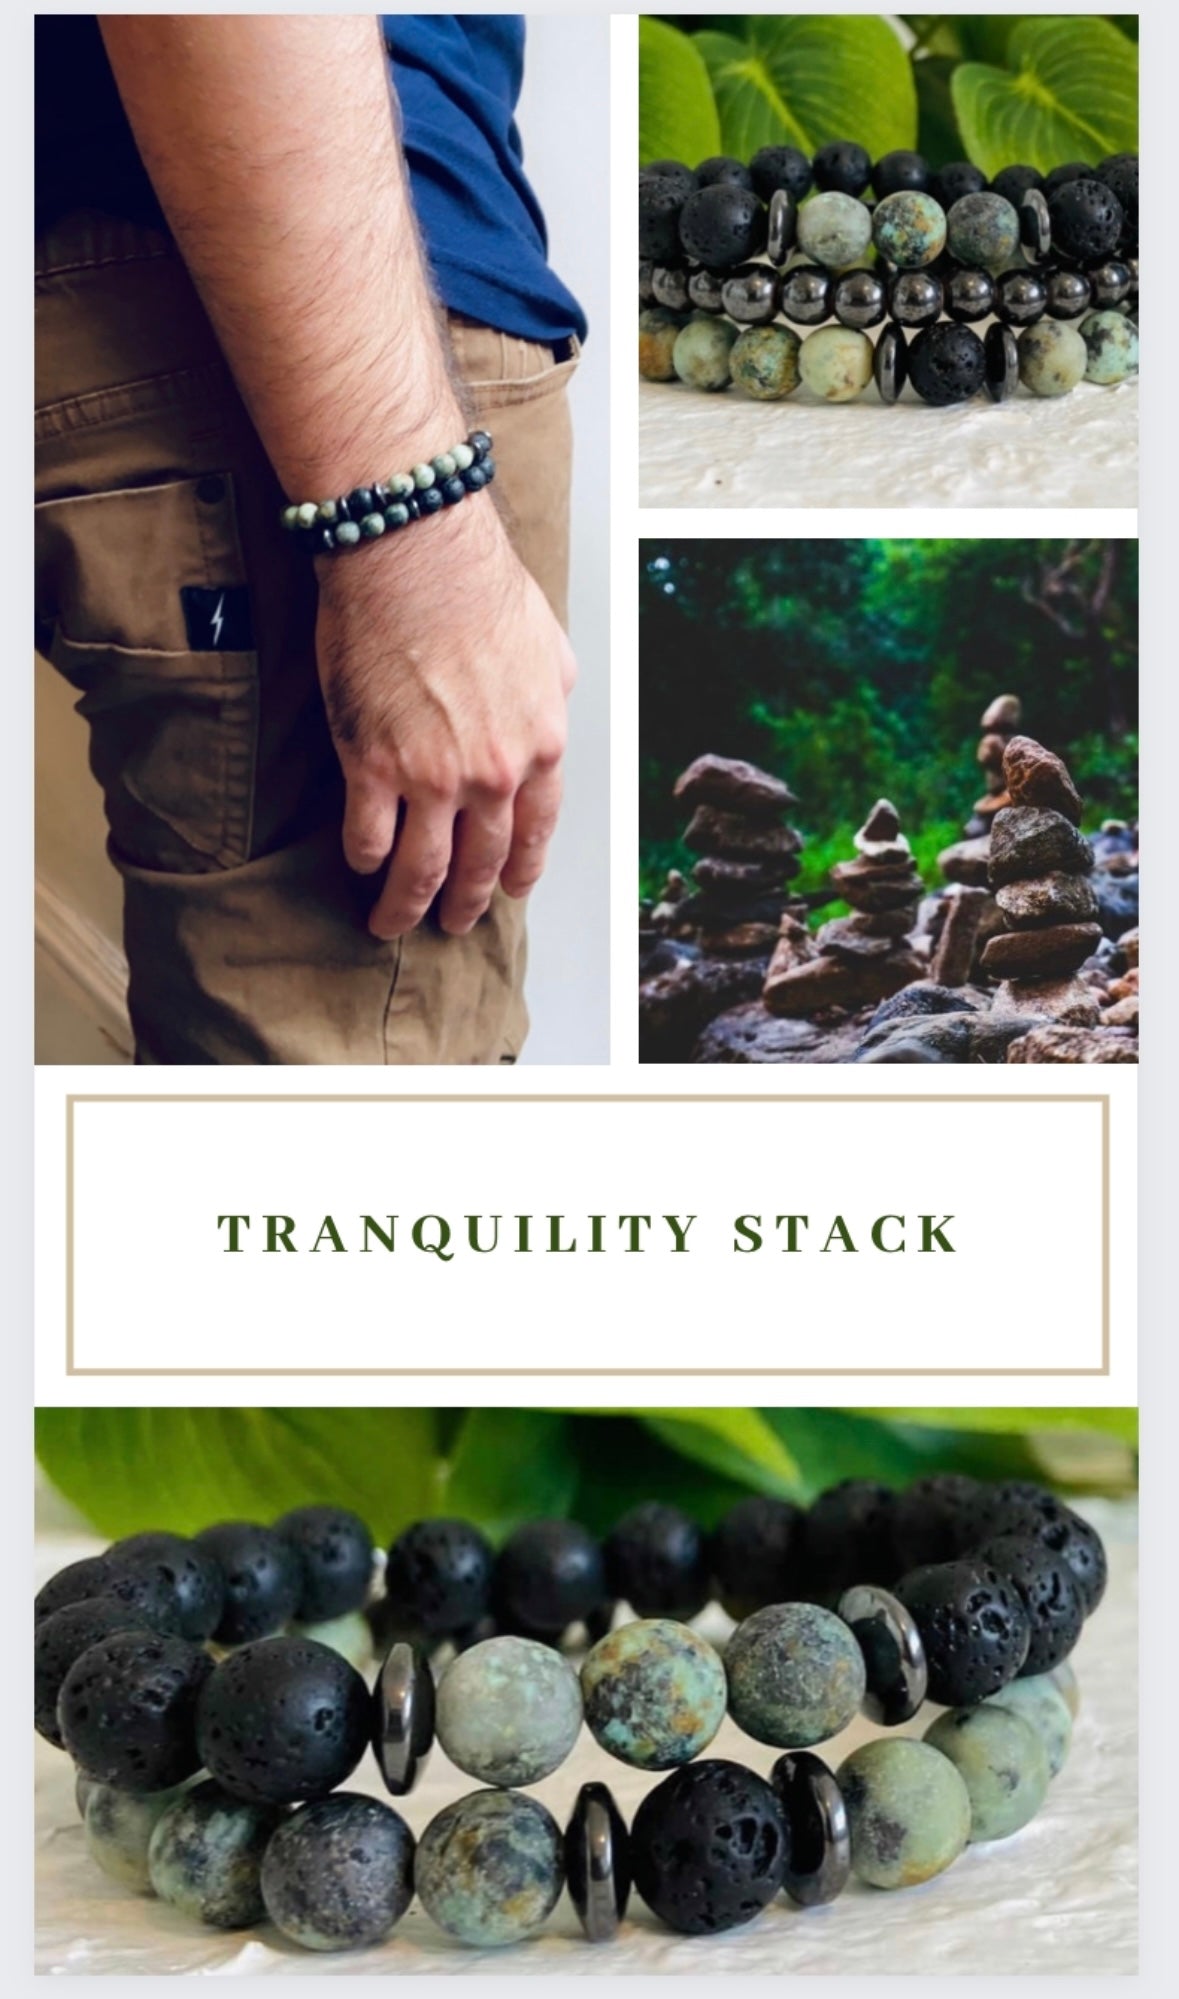 Tranquility Stack.